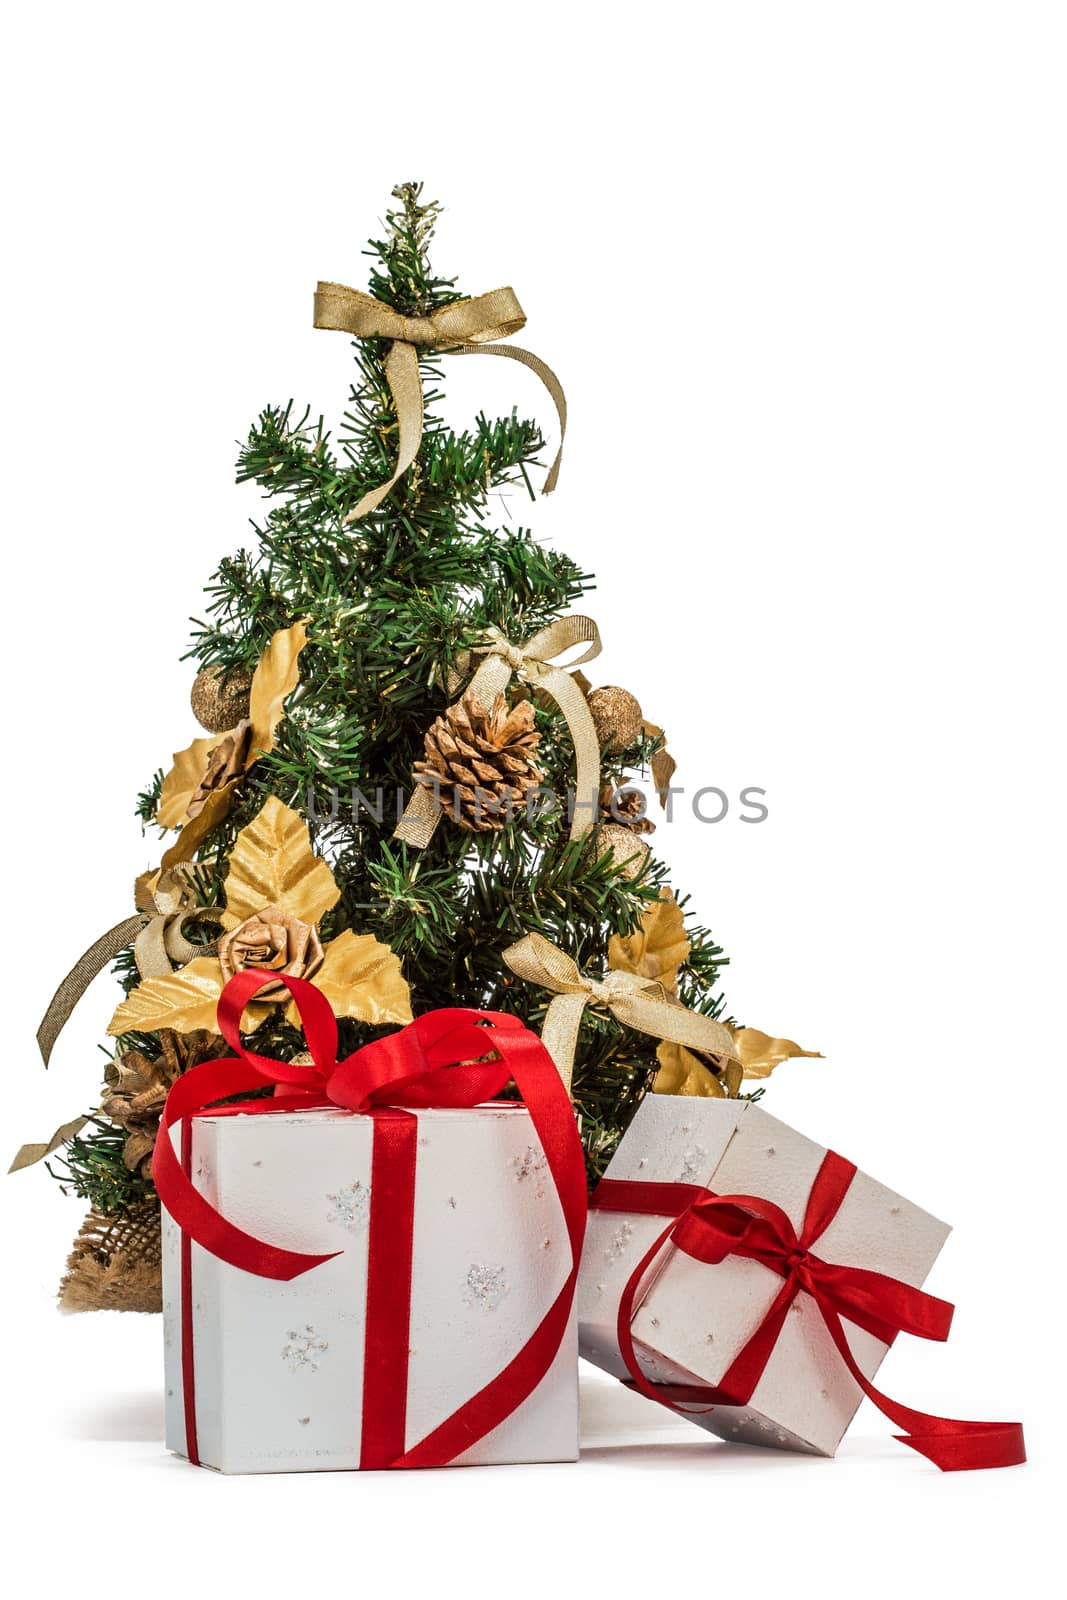 Decorated Christmas tree and gifts, isolated on white background